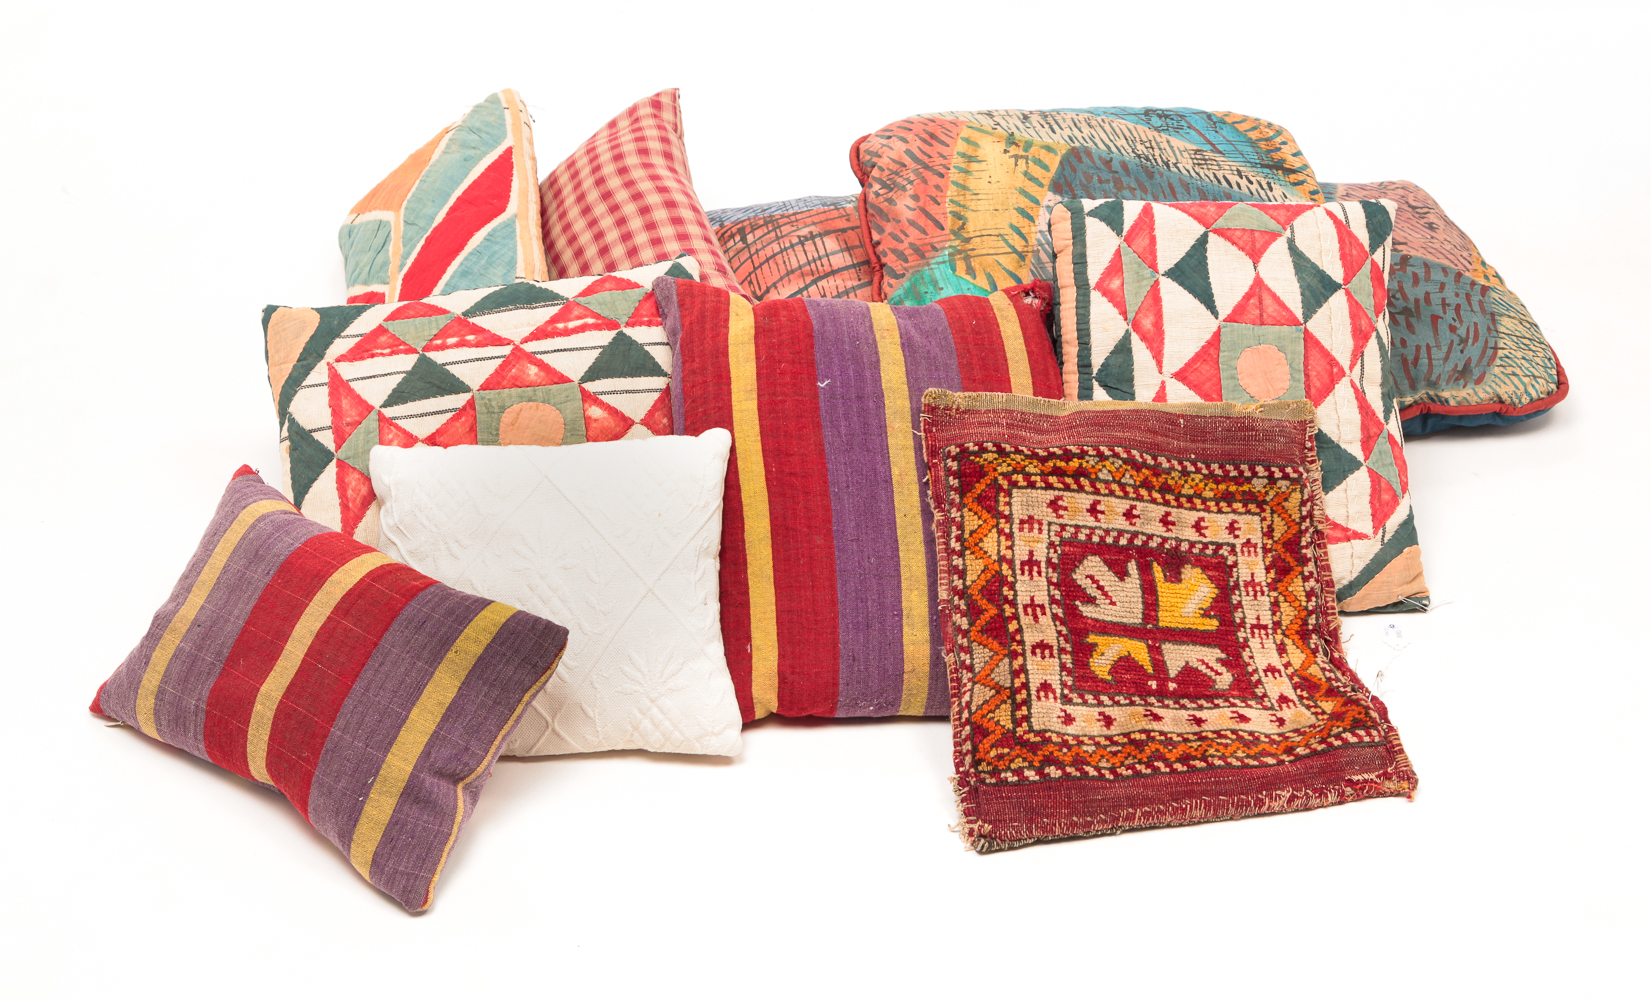 GROUP OF CONTEMPORARY FOLKSY PILLOWS  2dfcf6